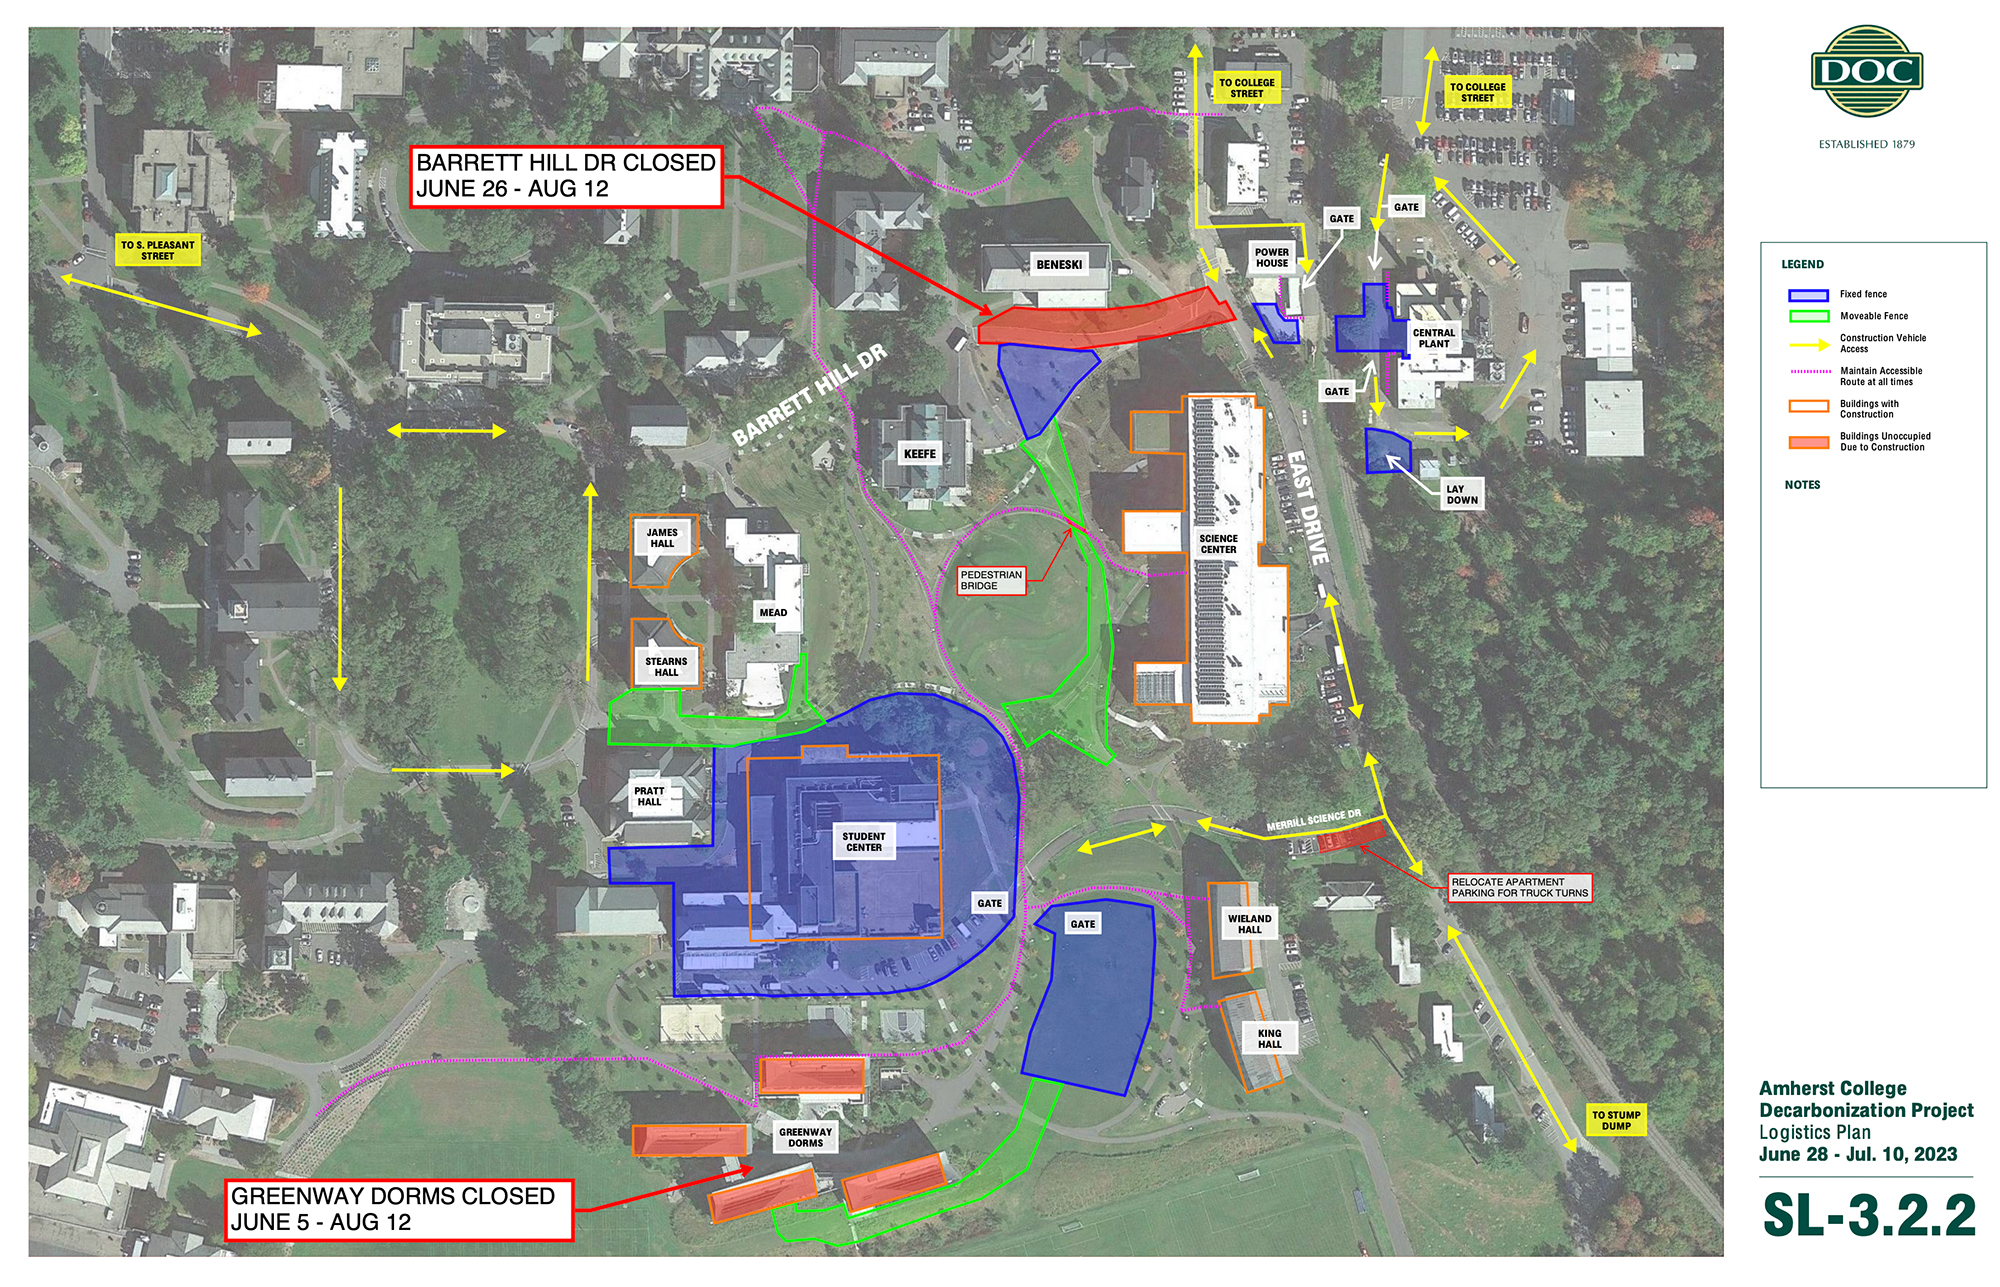 A construction map of campus showing areas of work described in the accompanying text